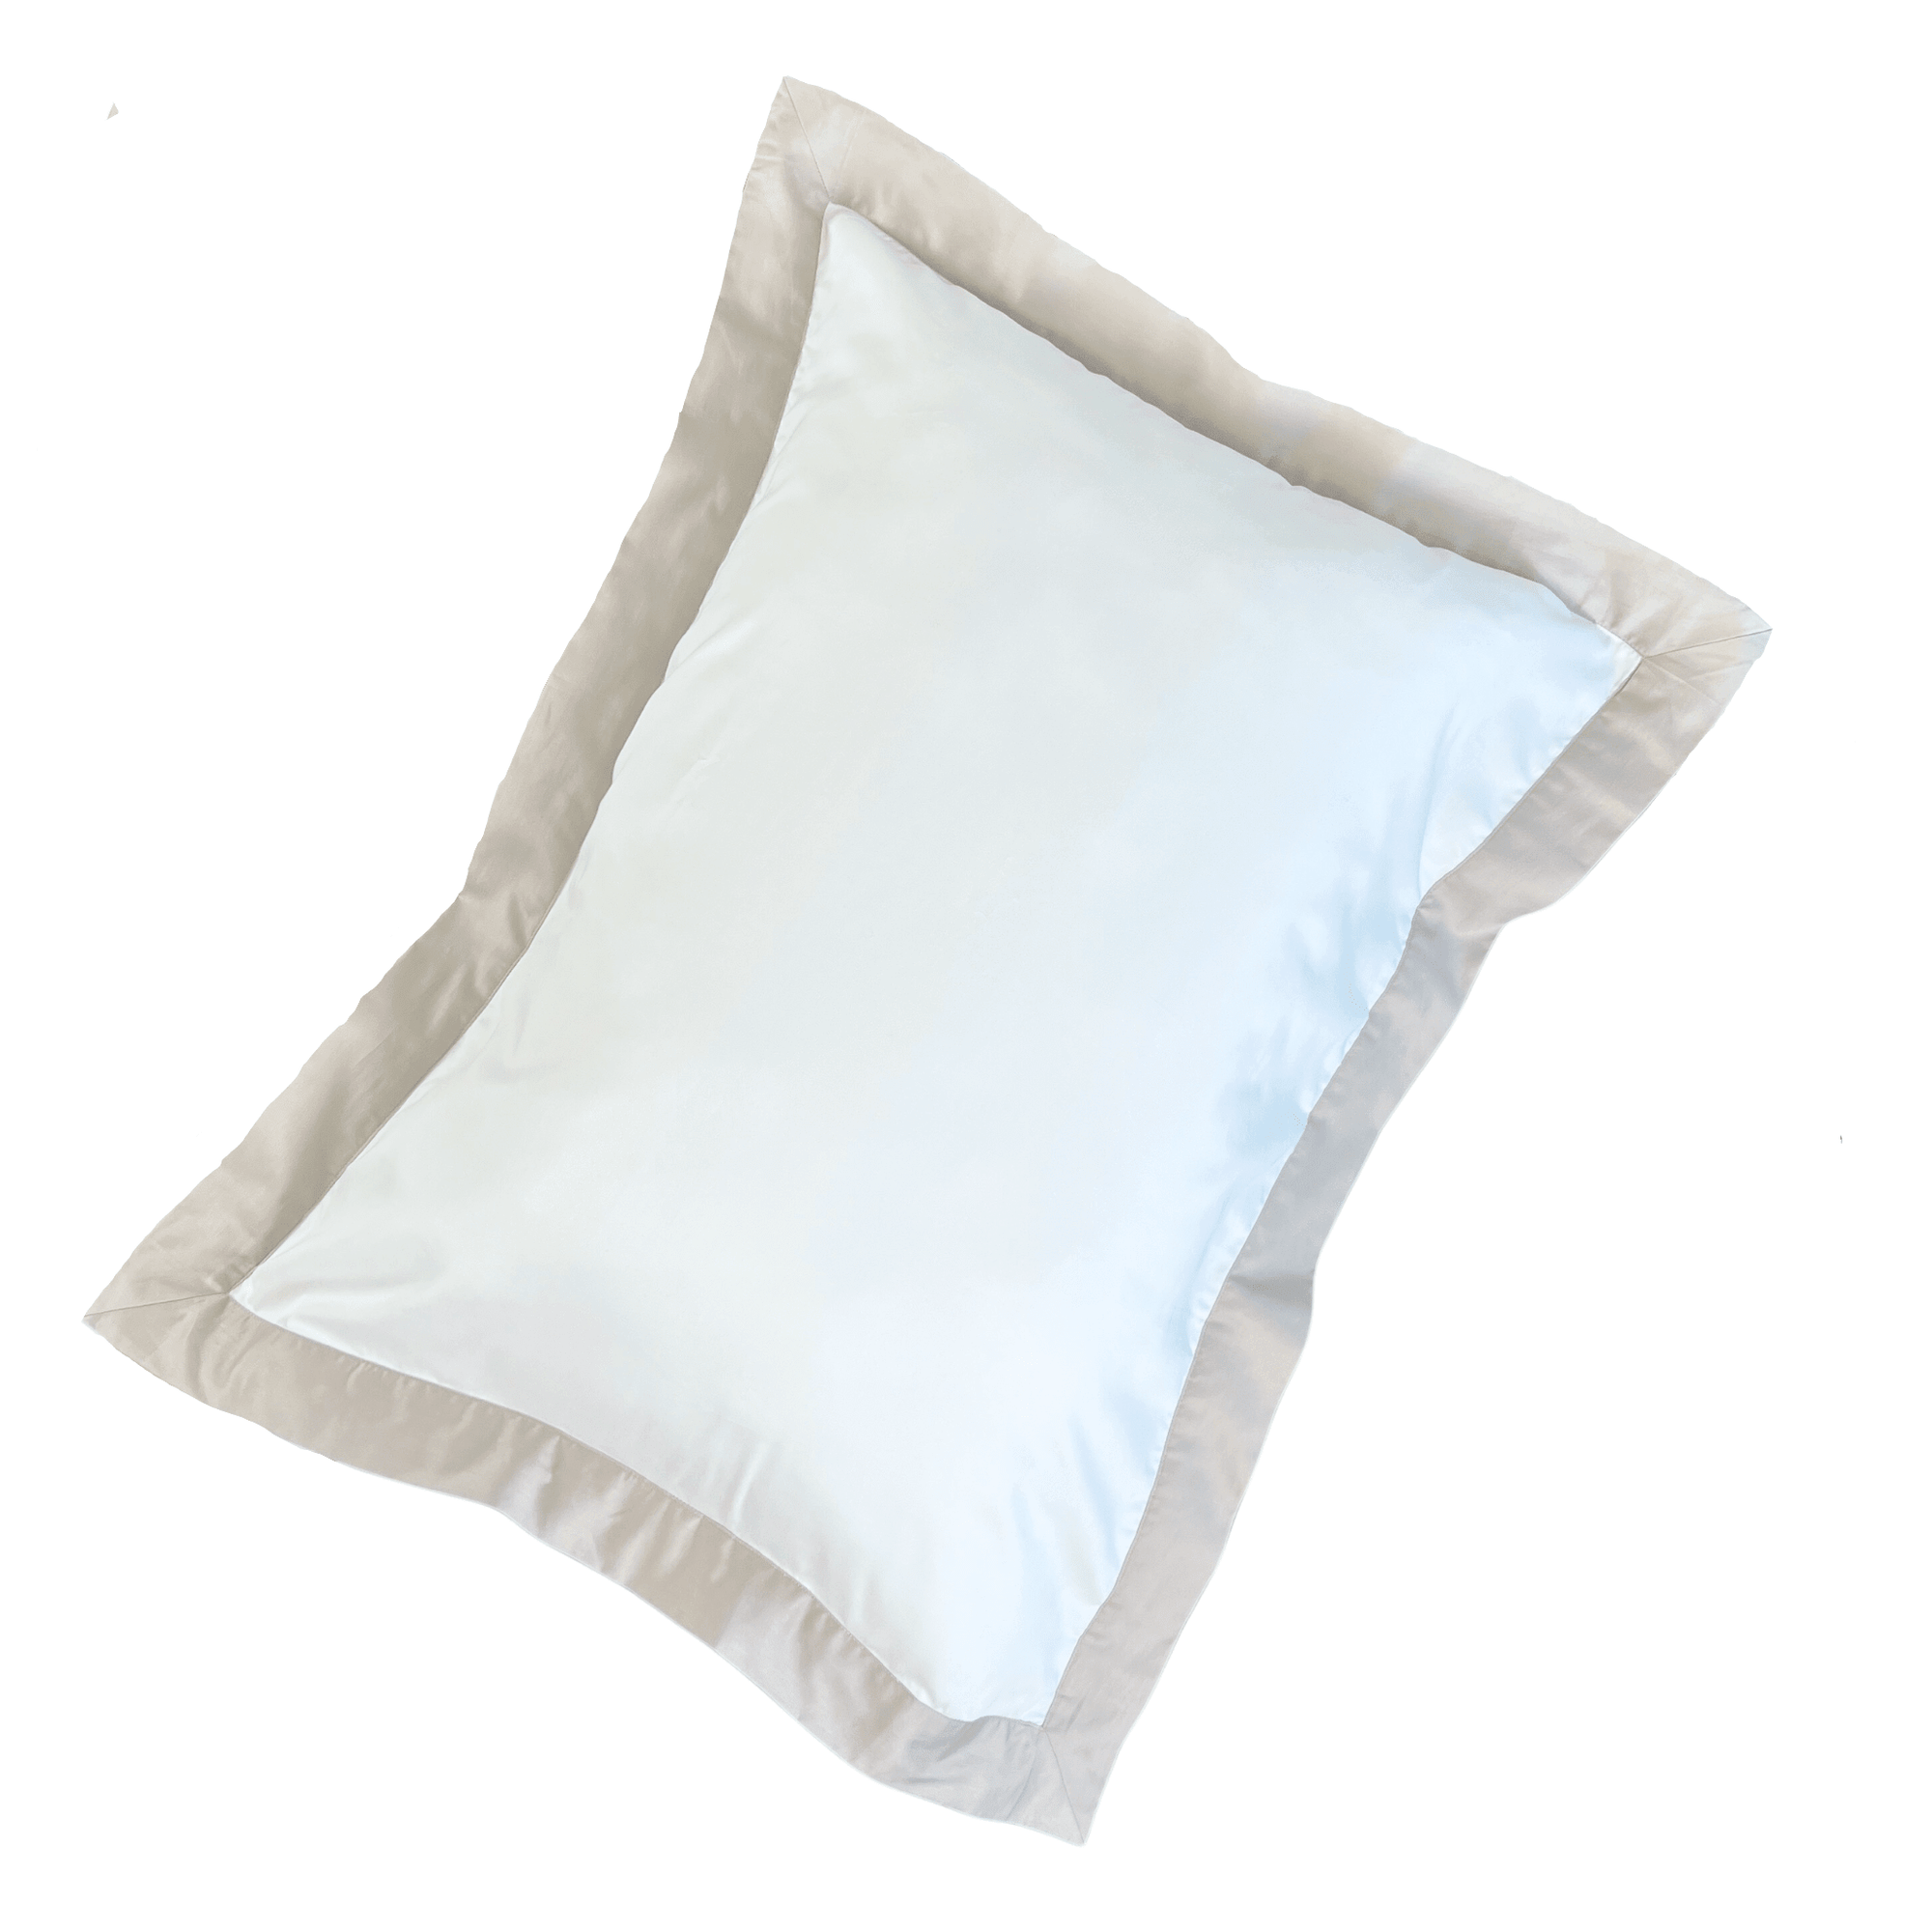 White Sham with Pewter Flange - Stylish Bedding Accessories by Beddley, As Seen On Shark Tank.